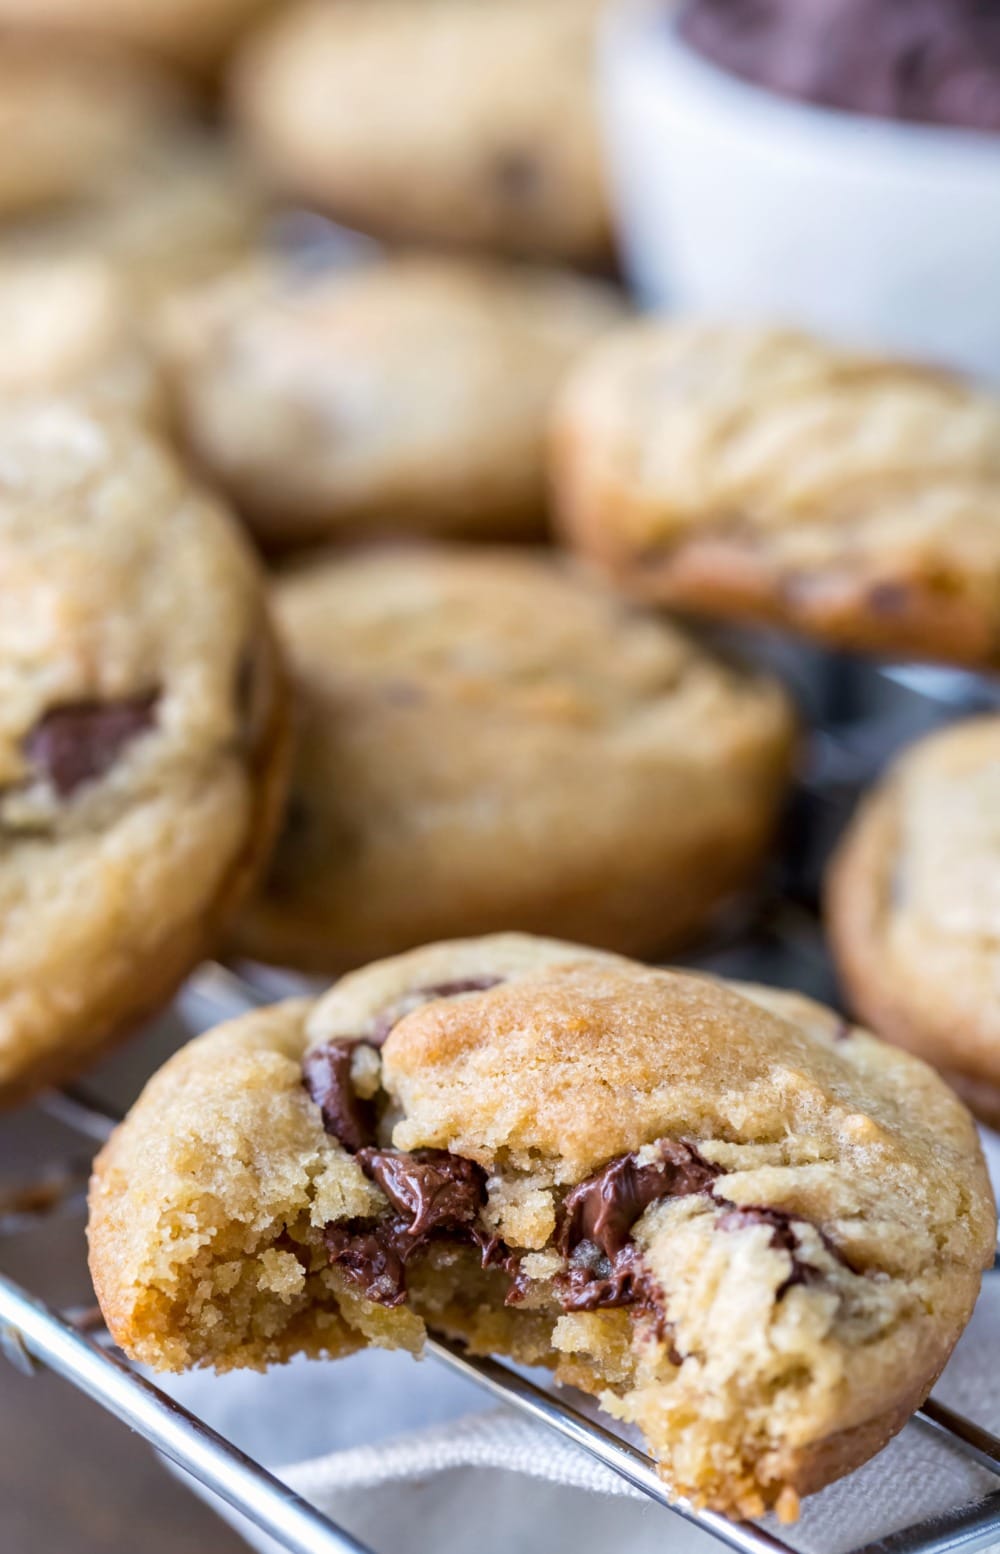 https://www.ihearteating.com/wp-content/uploads/2018/02/muffin-tin-chocolate-chip-cookies-1000.jpg